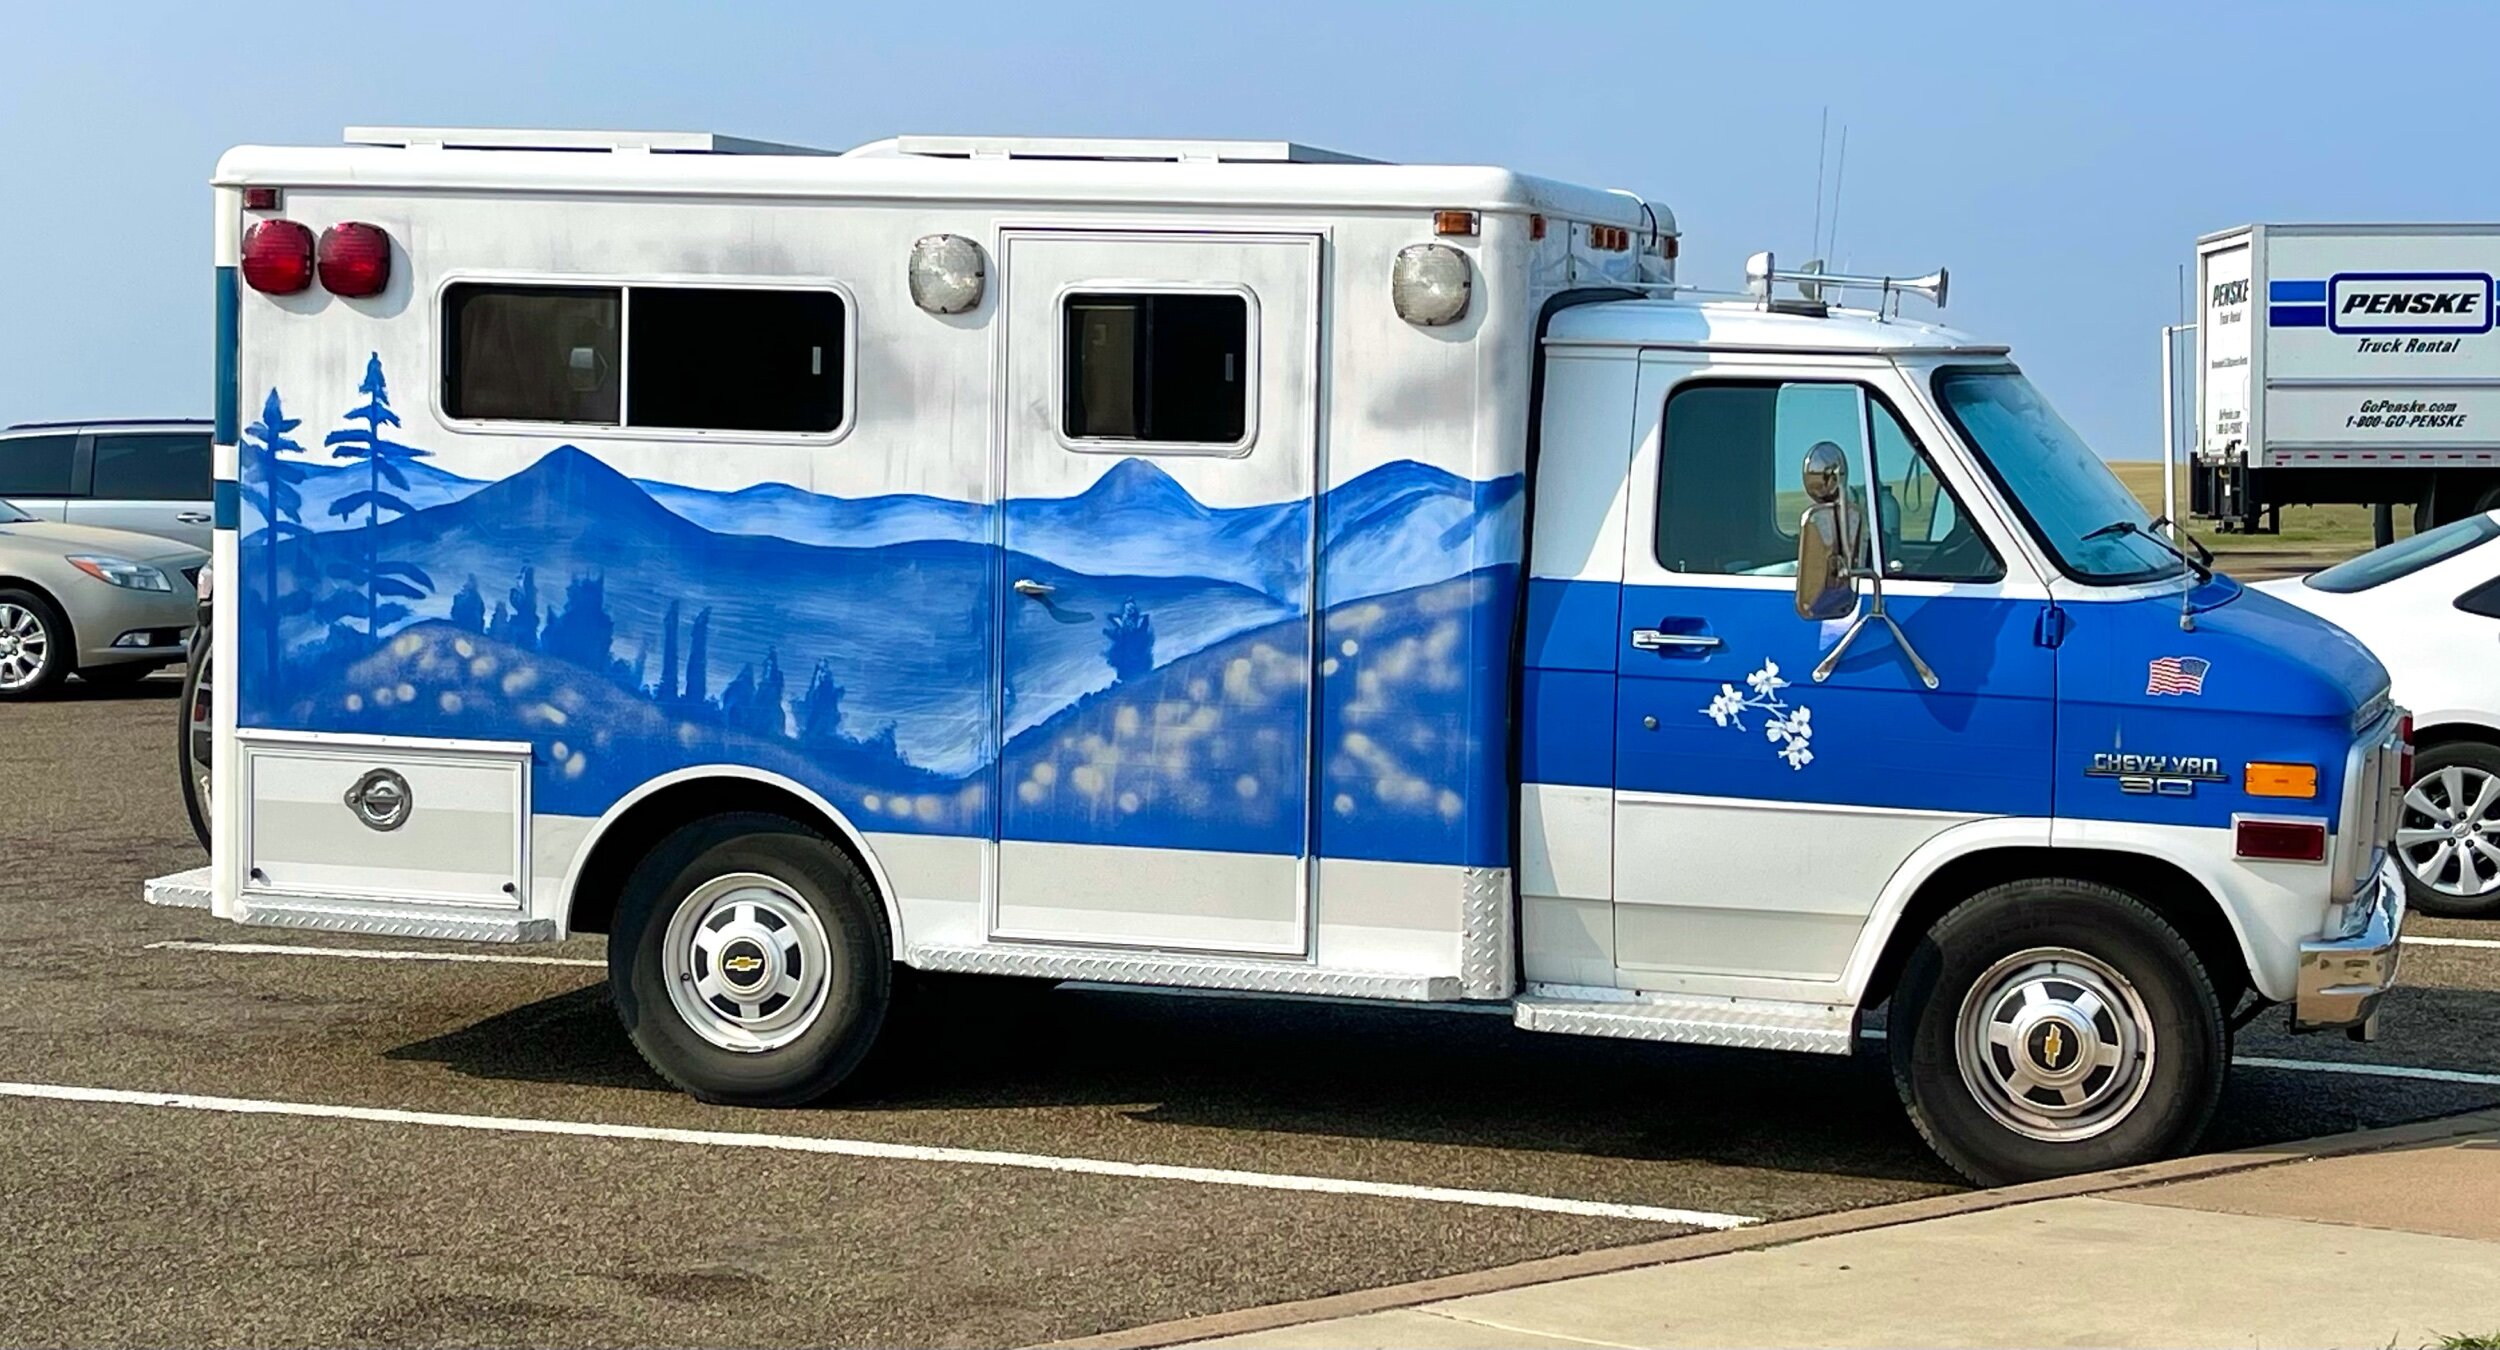  We haven’t shared any original campers along our travels recently…people continue to get more and more creative these days! 🚑 